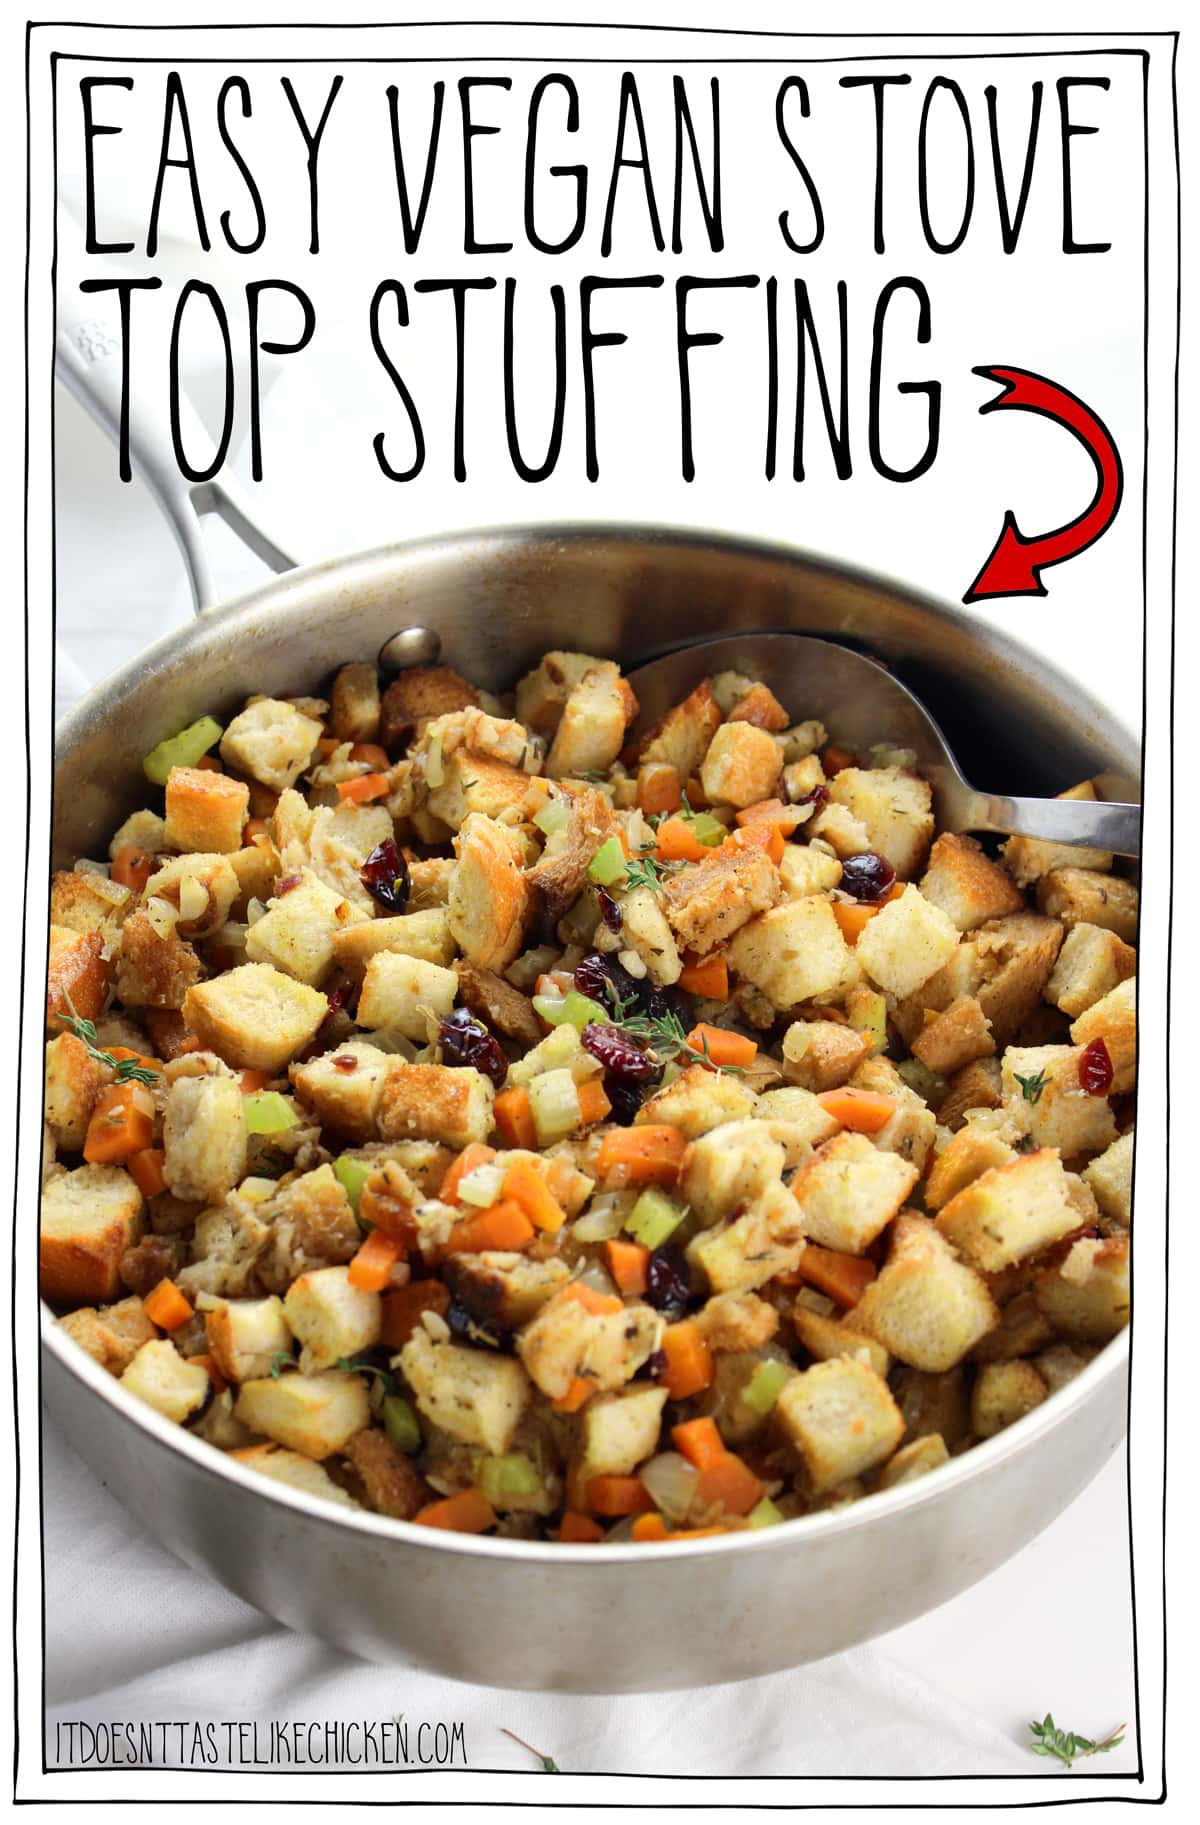 Easy Vegan Stove Top Stuffing!! The perfect traditional stuffing for Thanksgiving or Christmas. Just 30 minutes and can be made ahead of time. Perfectly seasoned, fluffy, with sage, thyme, rosemary and dried cranberries. #itdoesnttastelikechicken #veganrecipes #veganthanksgiving #thanksgiving